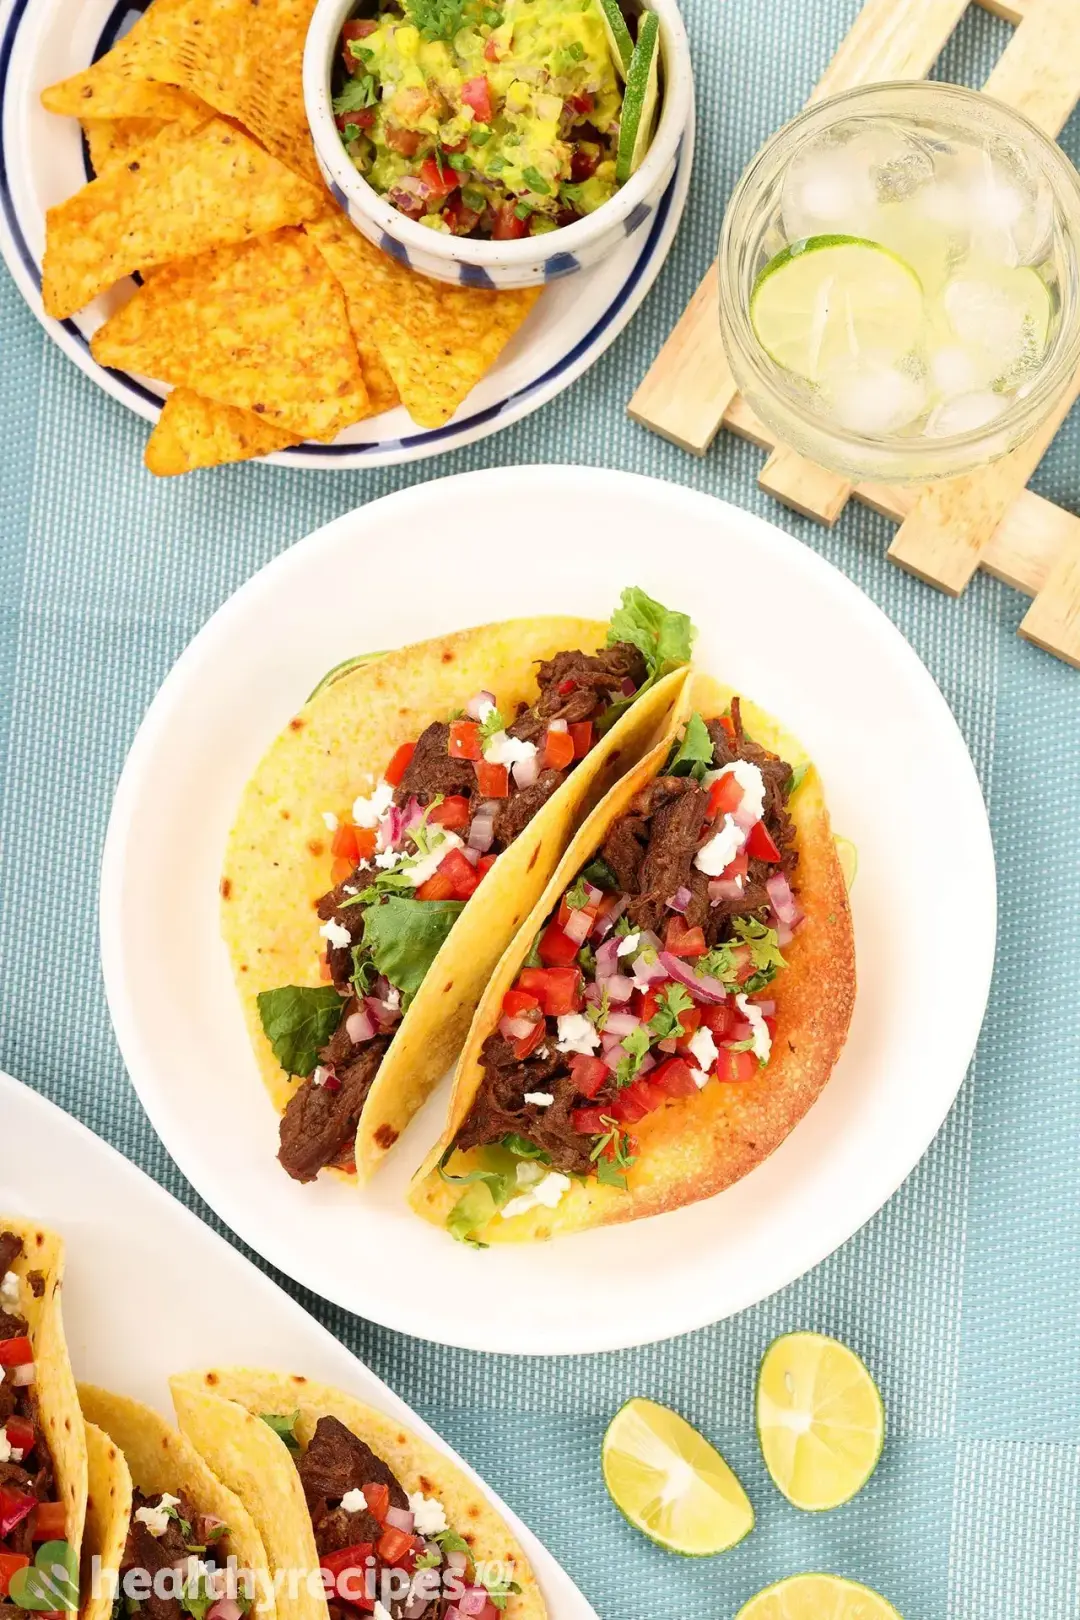 What to Serve With Carne Asada